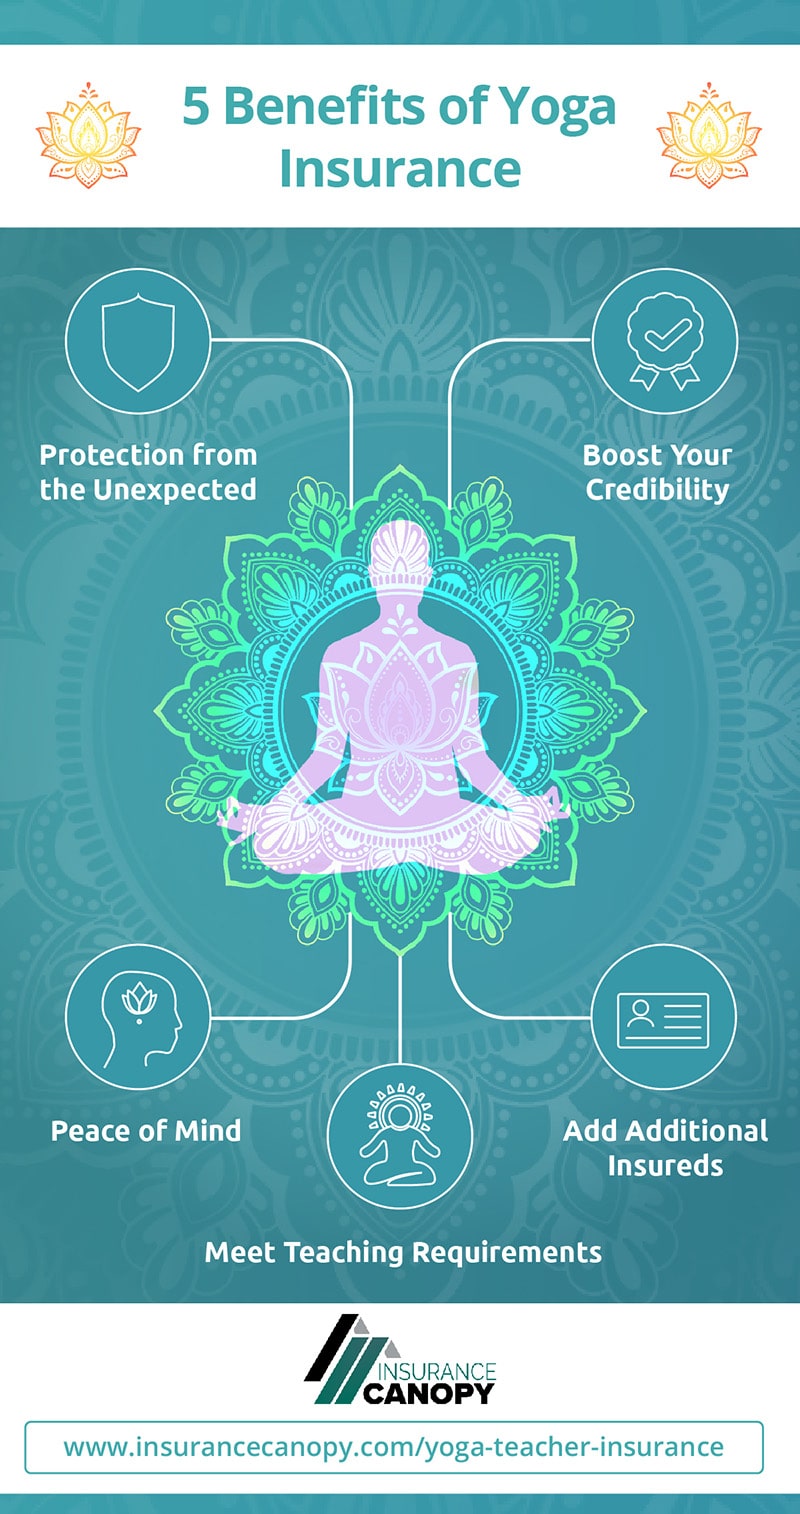 An infographic showing the 5 benefits of yoga insurance, which are protection from accidents, boosted credibility, peace of mind, additional insureds coverage, and meeting teaching requirements. Yoga insurance can be purchased at app.insurancecanopy.com/yoga-teacher-insurance